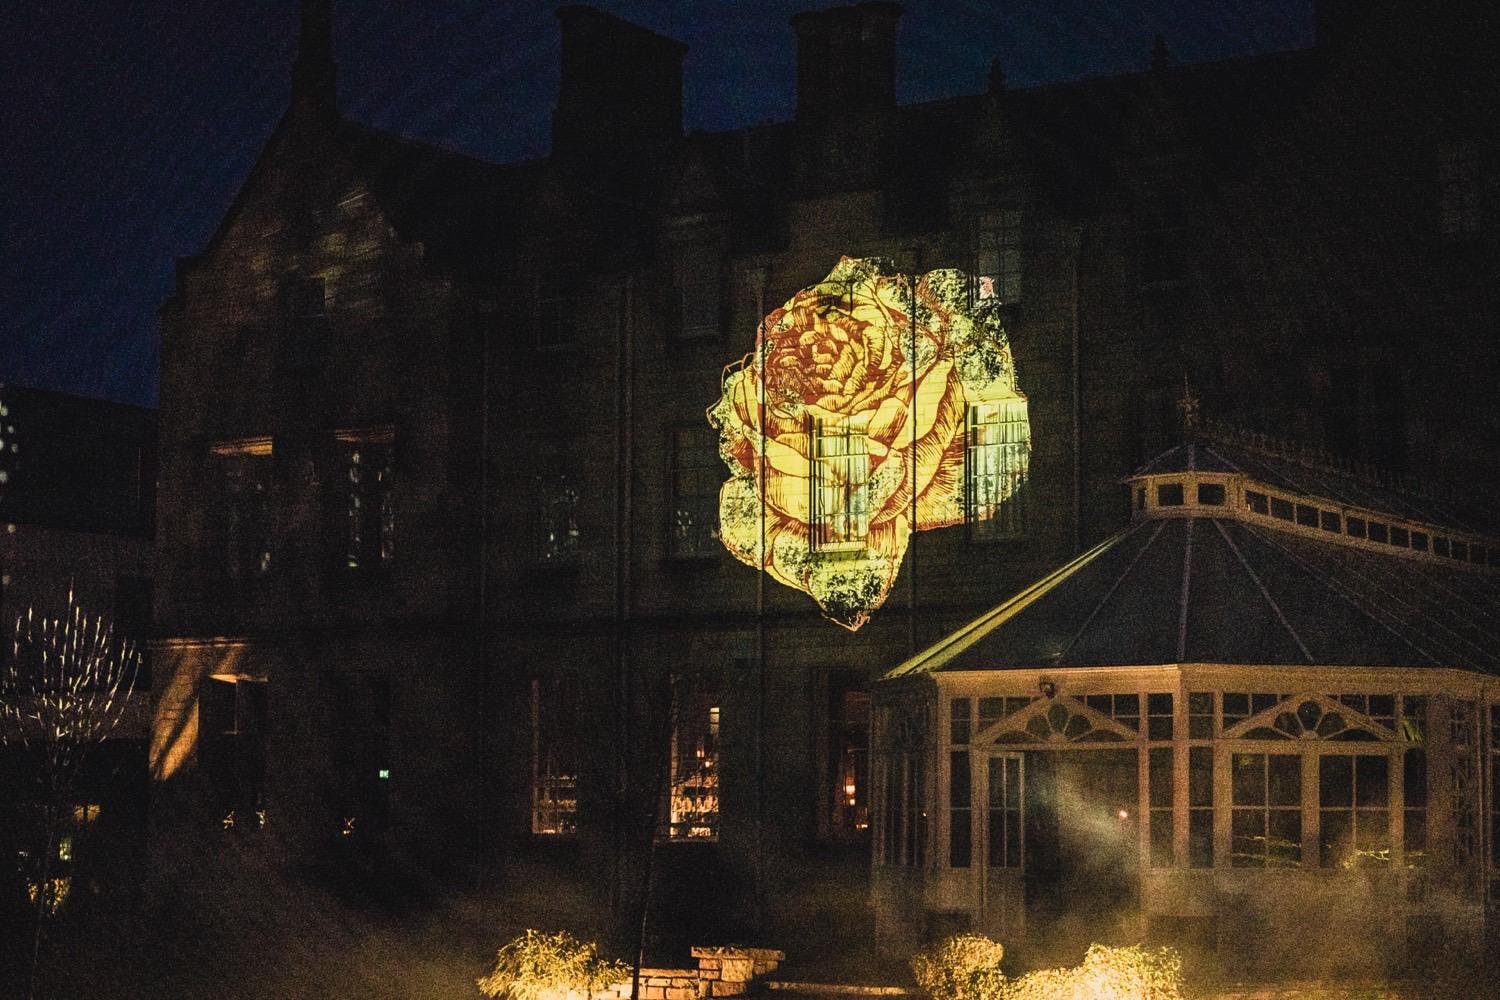 SCHLOSS Roxburghe launch party production with bespoke projection